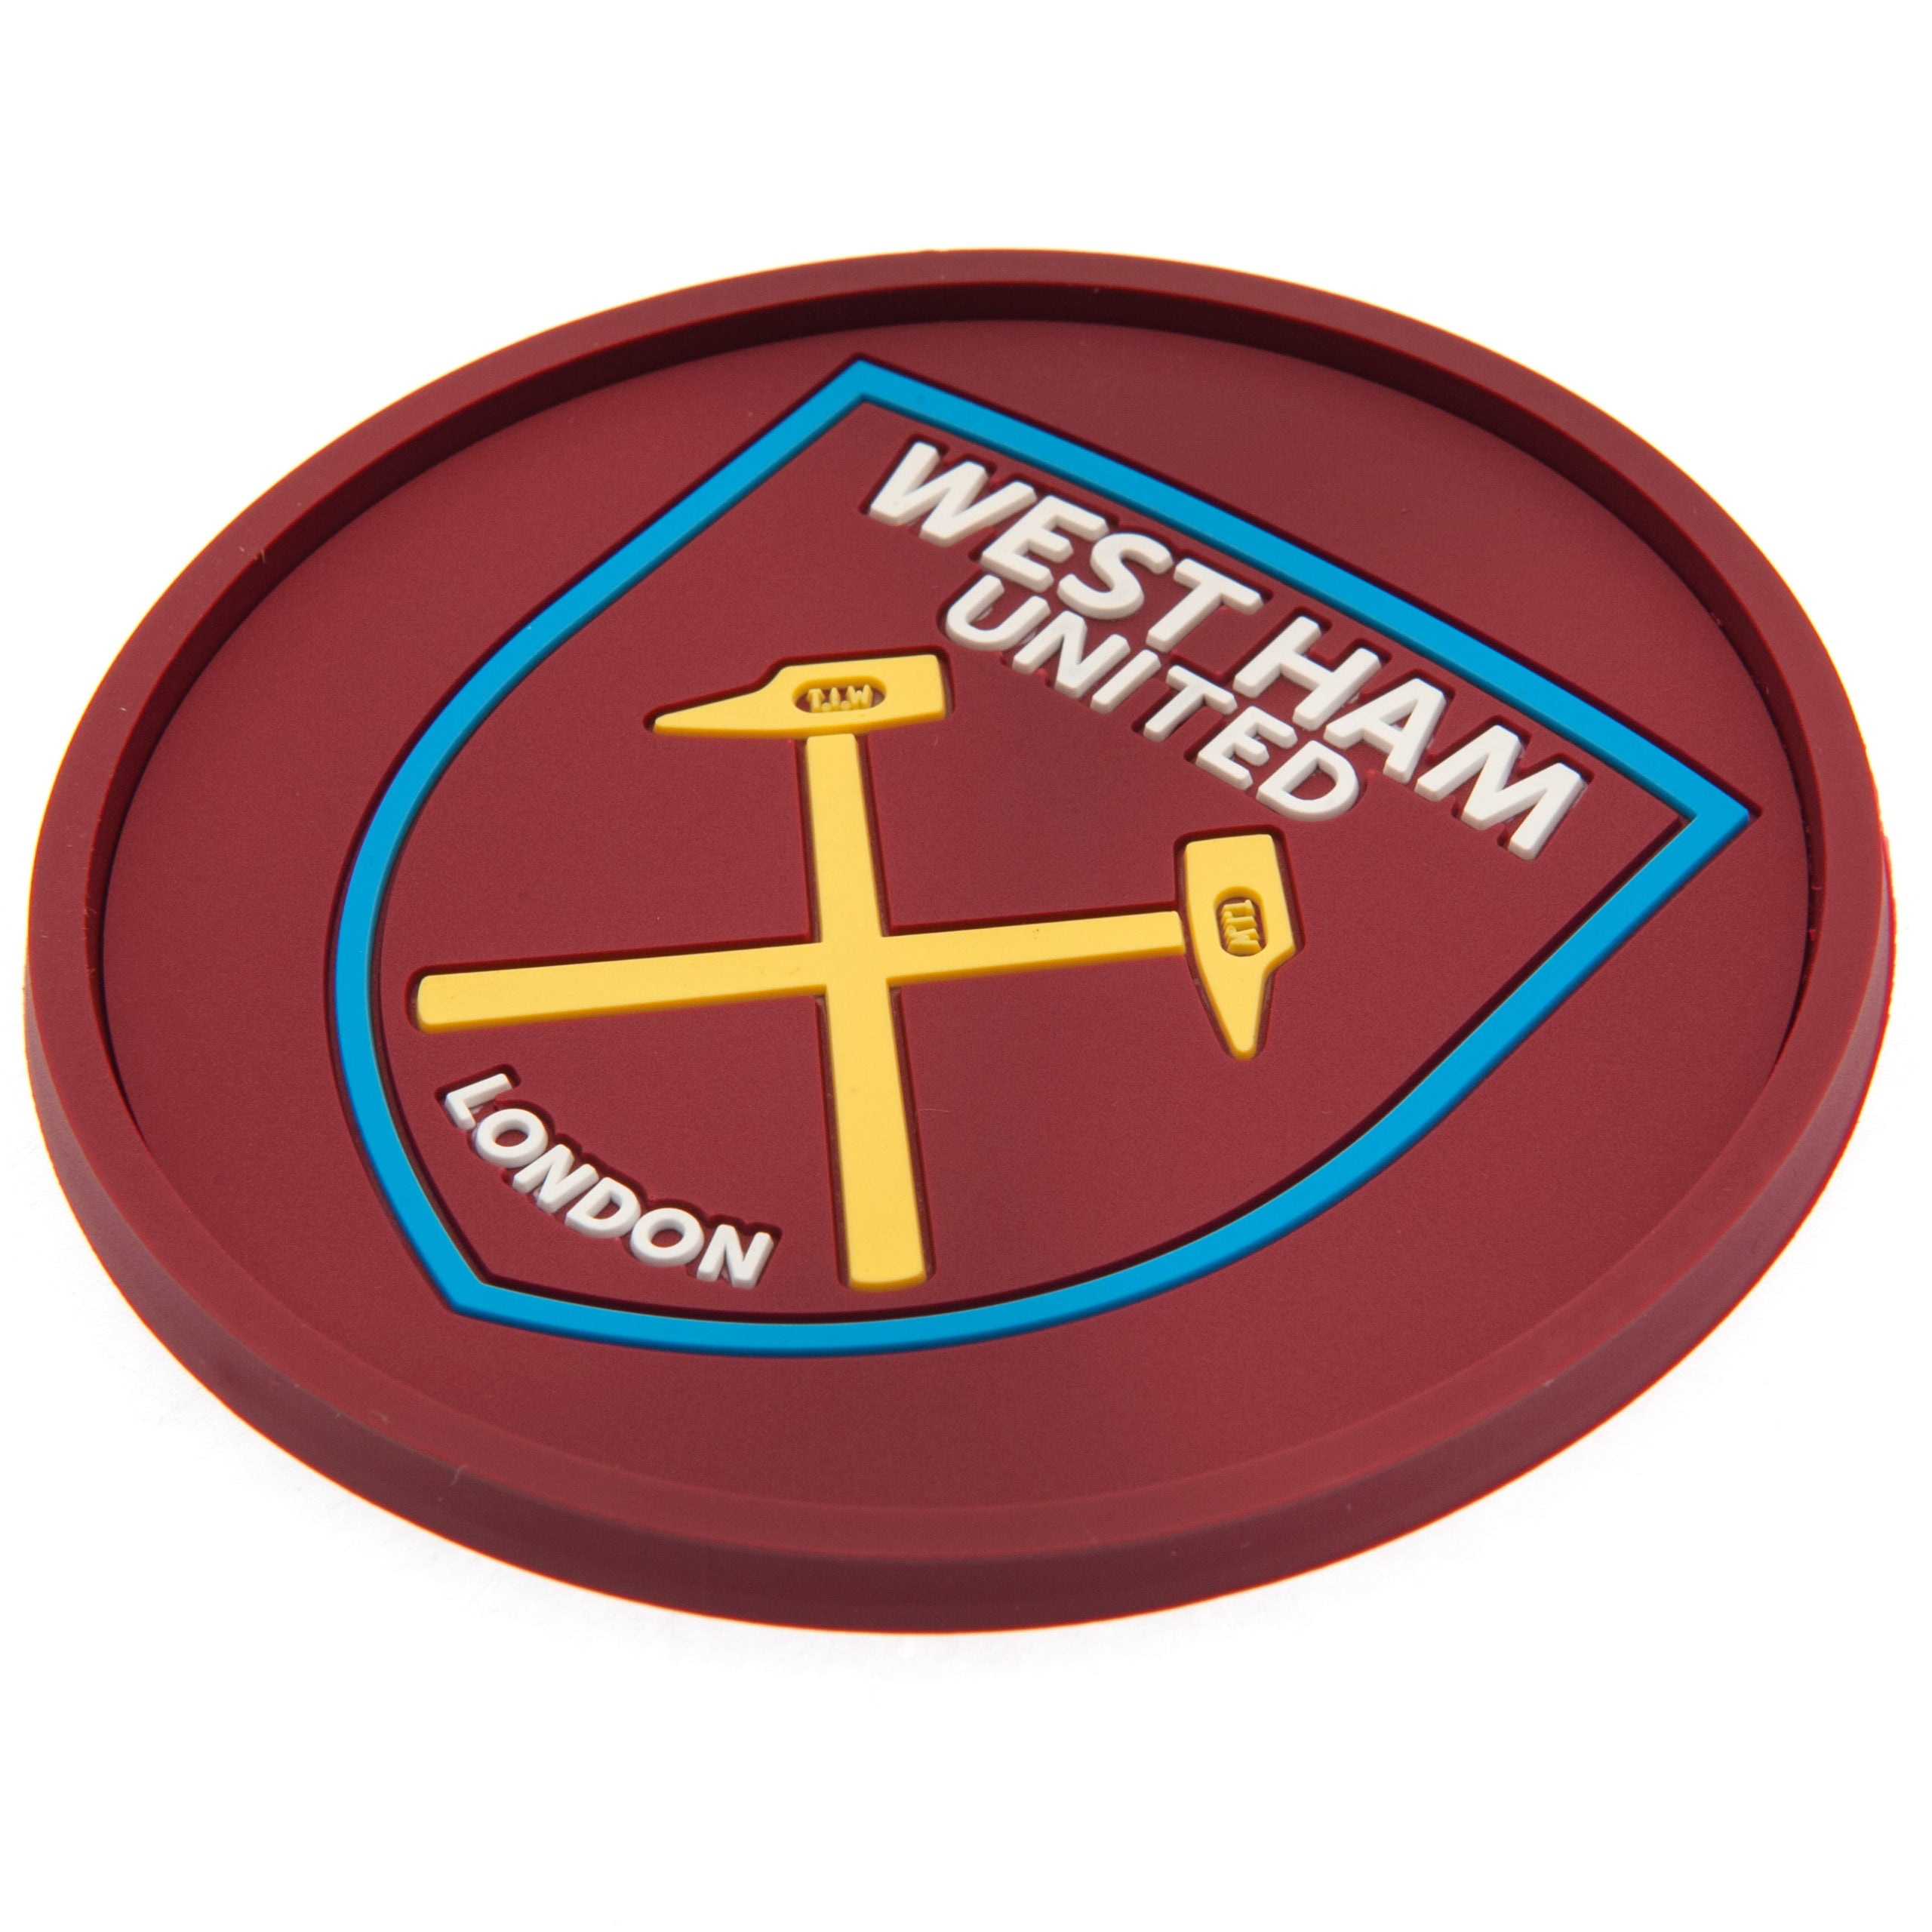 View West Ham United FC Silicone Coaster information